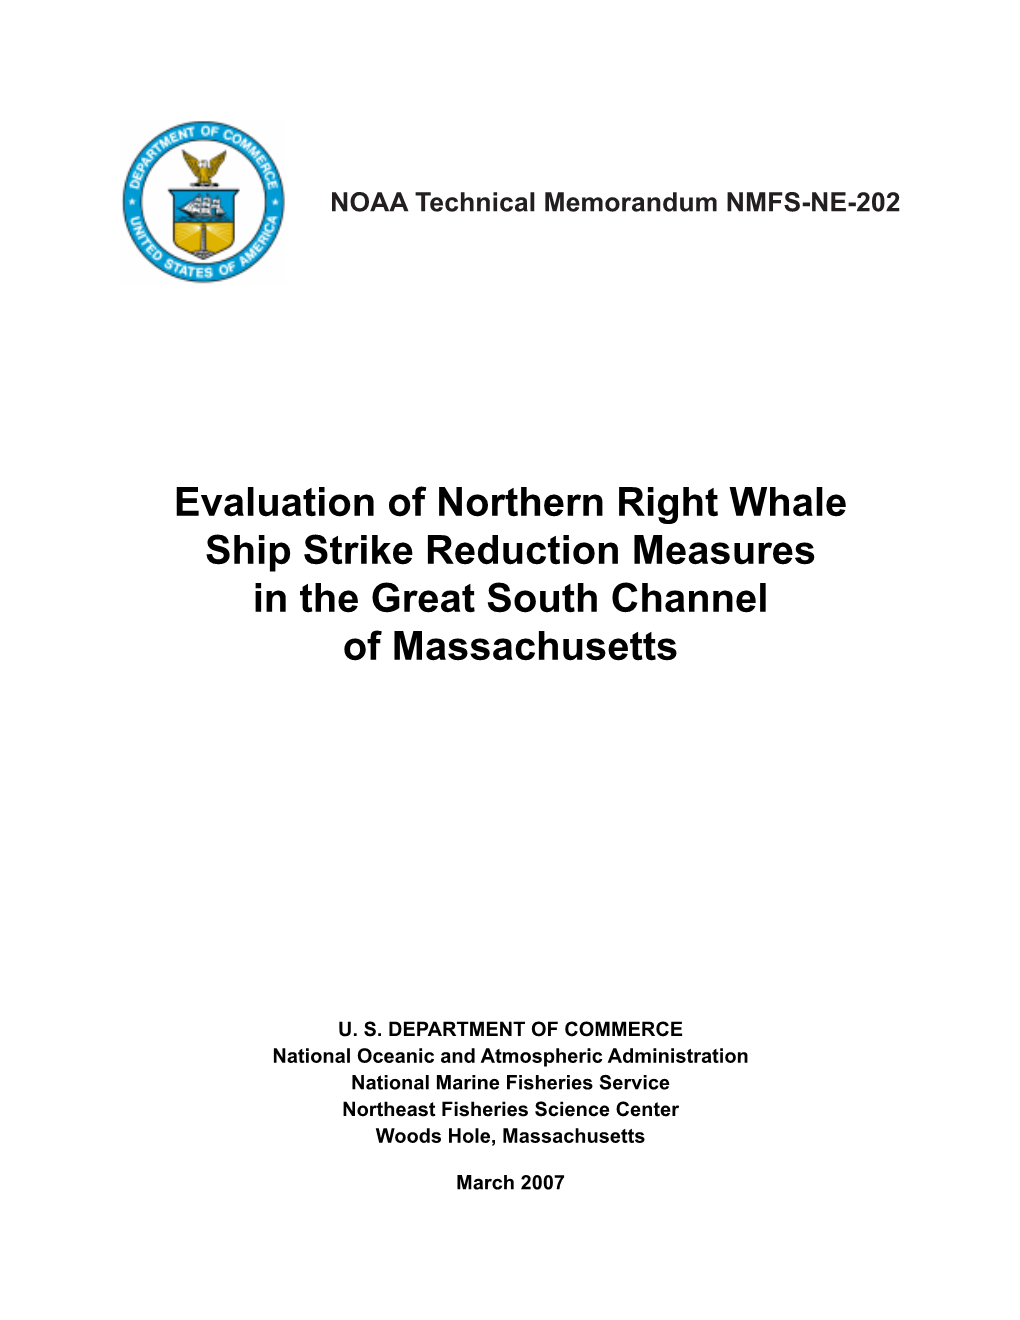 Evaluation of Northern Right Whale Ship Strike Reduction Measures in the Great South Channel of Massachusetts